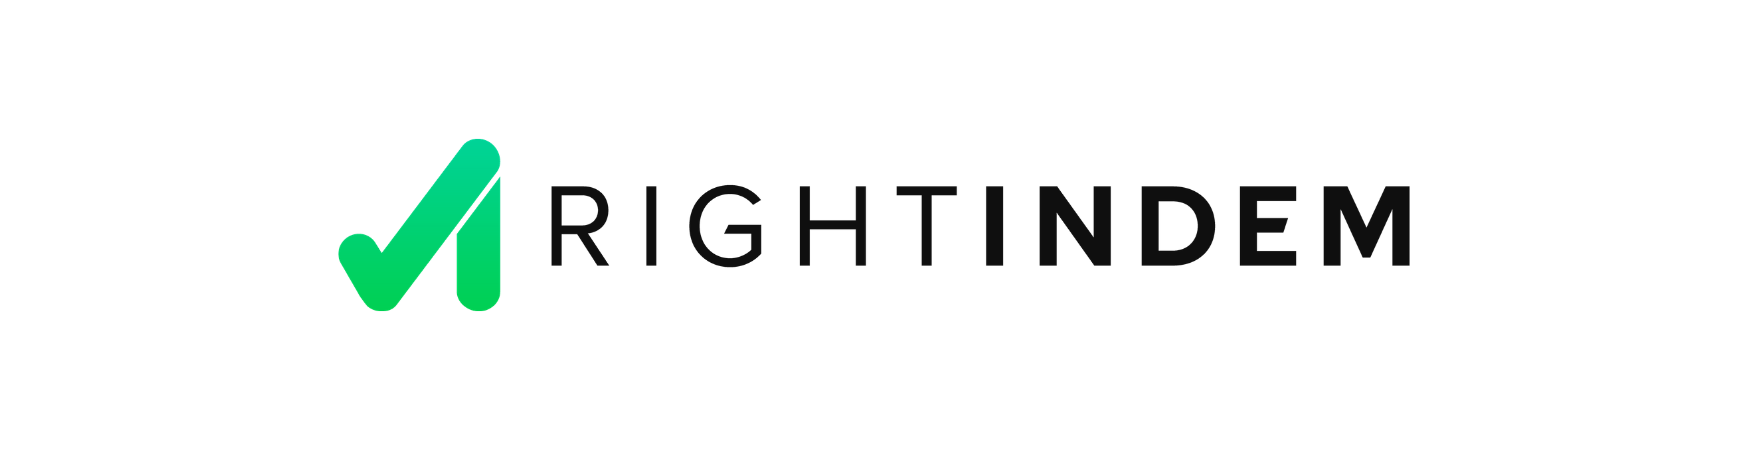 rightindem_is_an_insurtech100_company-_the_list_of_the_worlds_most_innovative_insurtech_companies_selected_by_fintech_globa.png